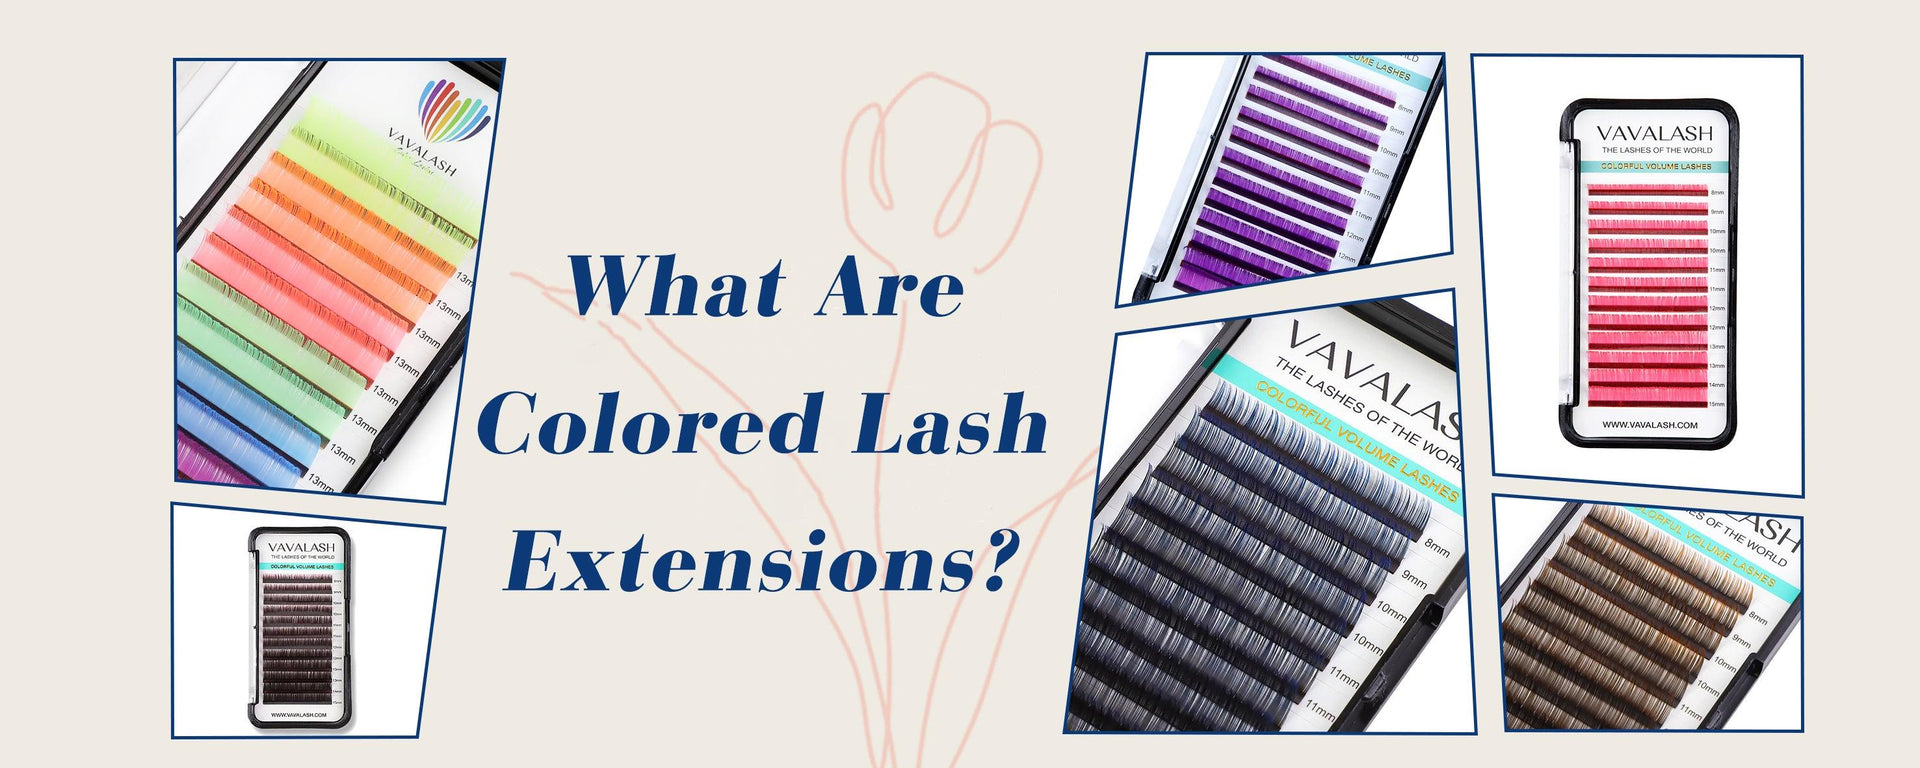 What Are Colored Lash Extensions? - VAVALASH